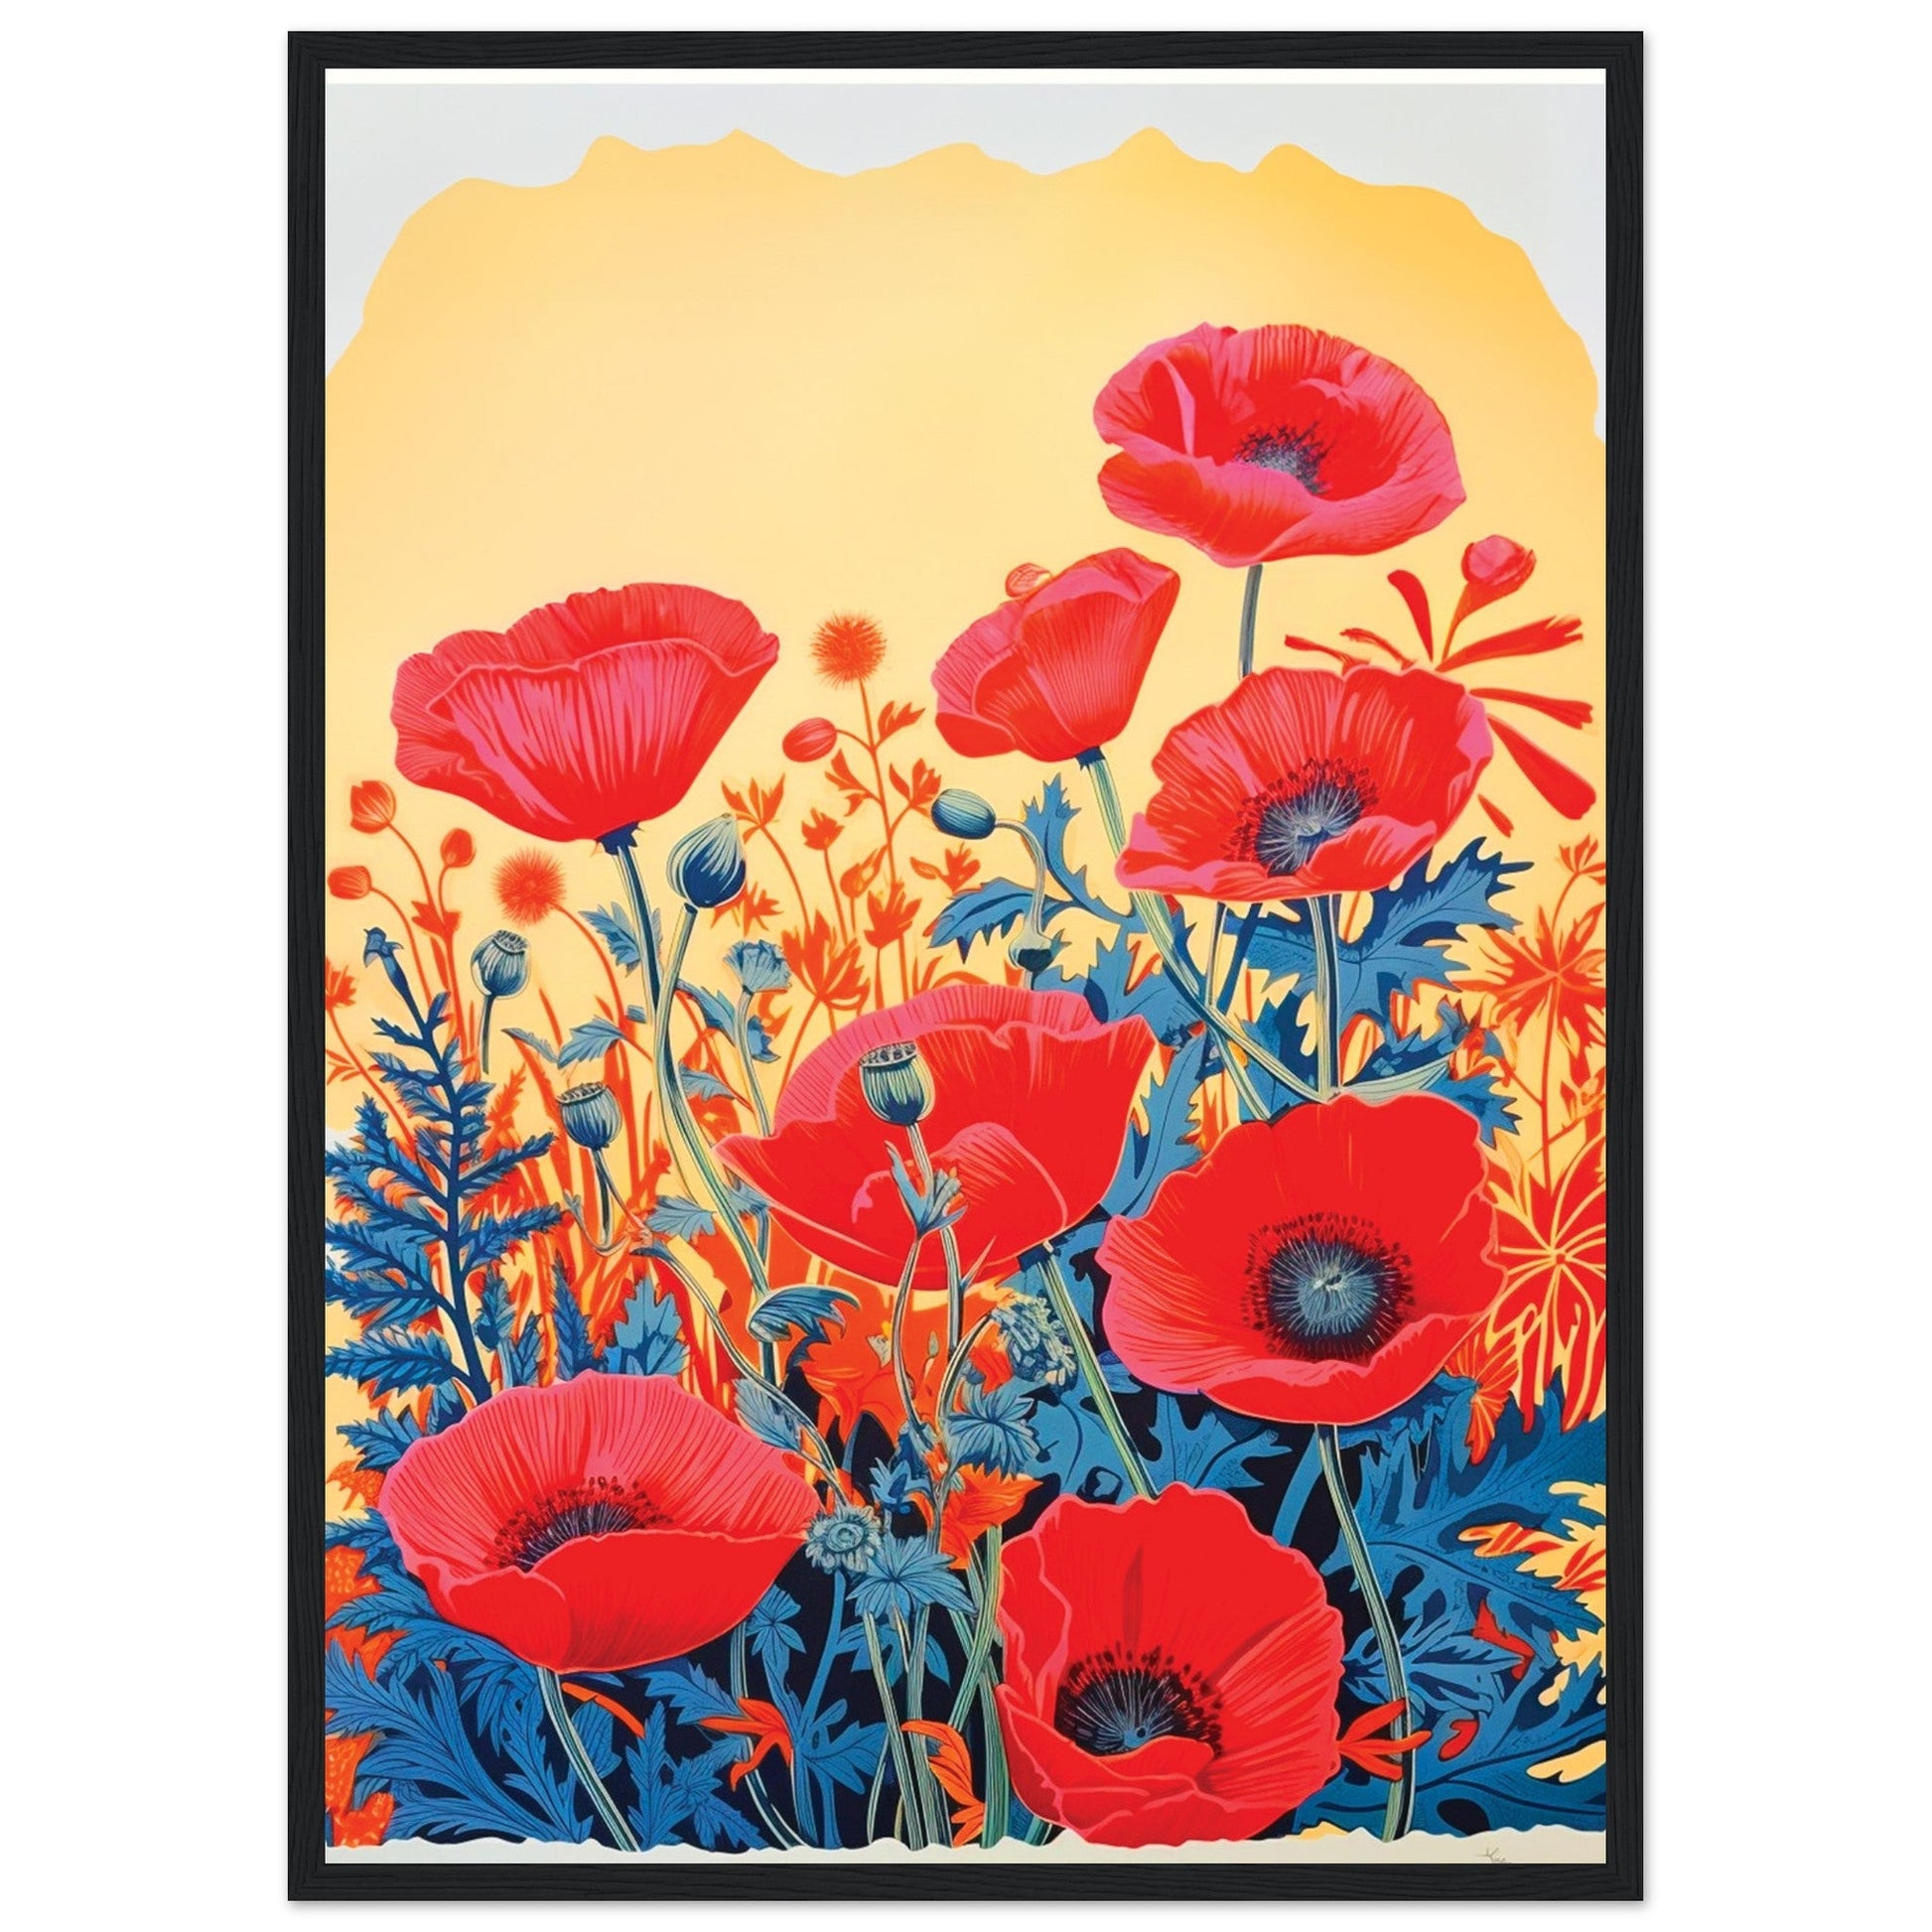 Red Poppies - Wooden Framed Poster, big floral art print, Red Poppies, Risograph Flowers, #illieeart